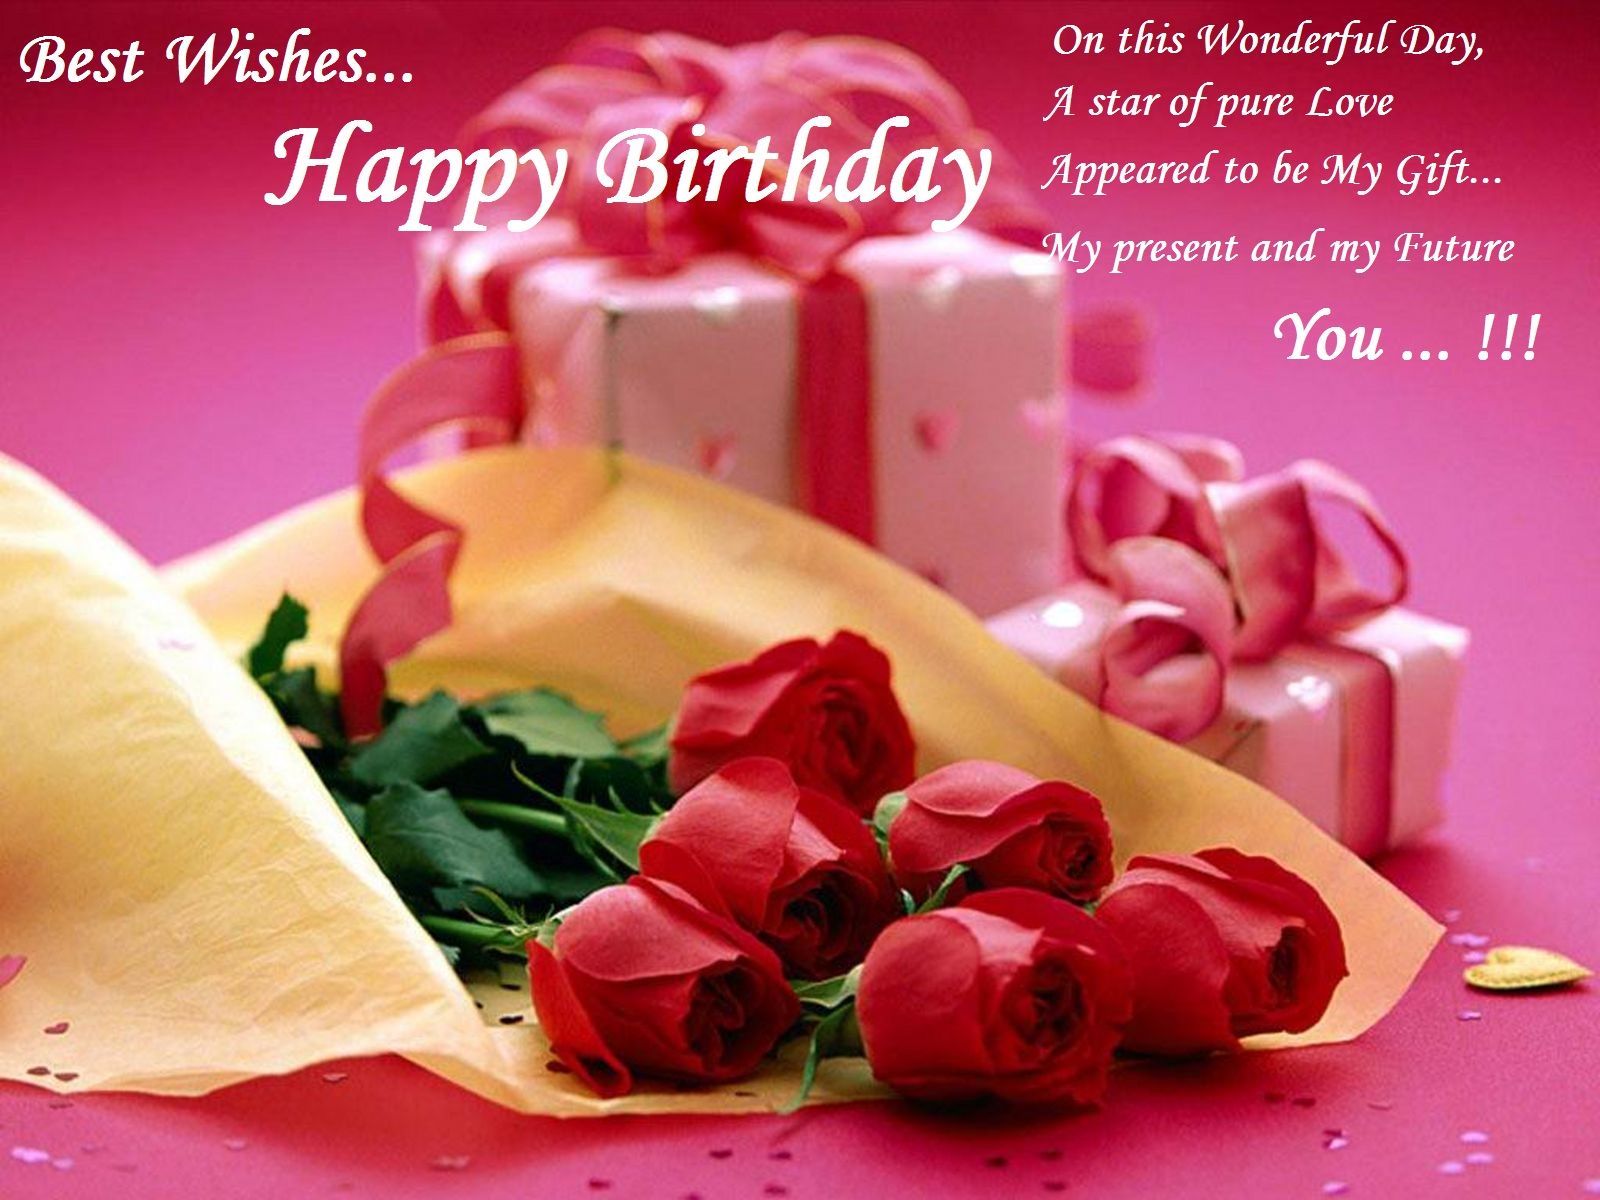 Best Wishes For Birthday Wallpaper - Best Wish For Happy Birthday - HD Wallpaper 